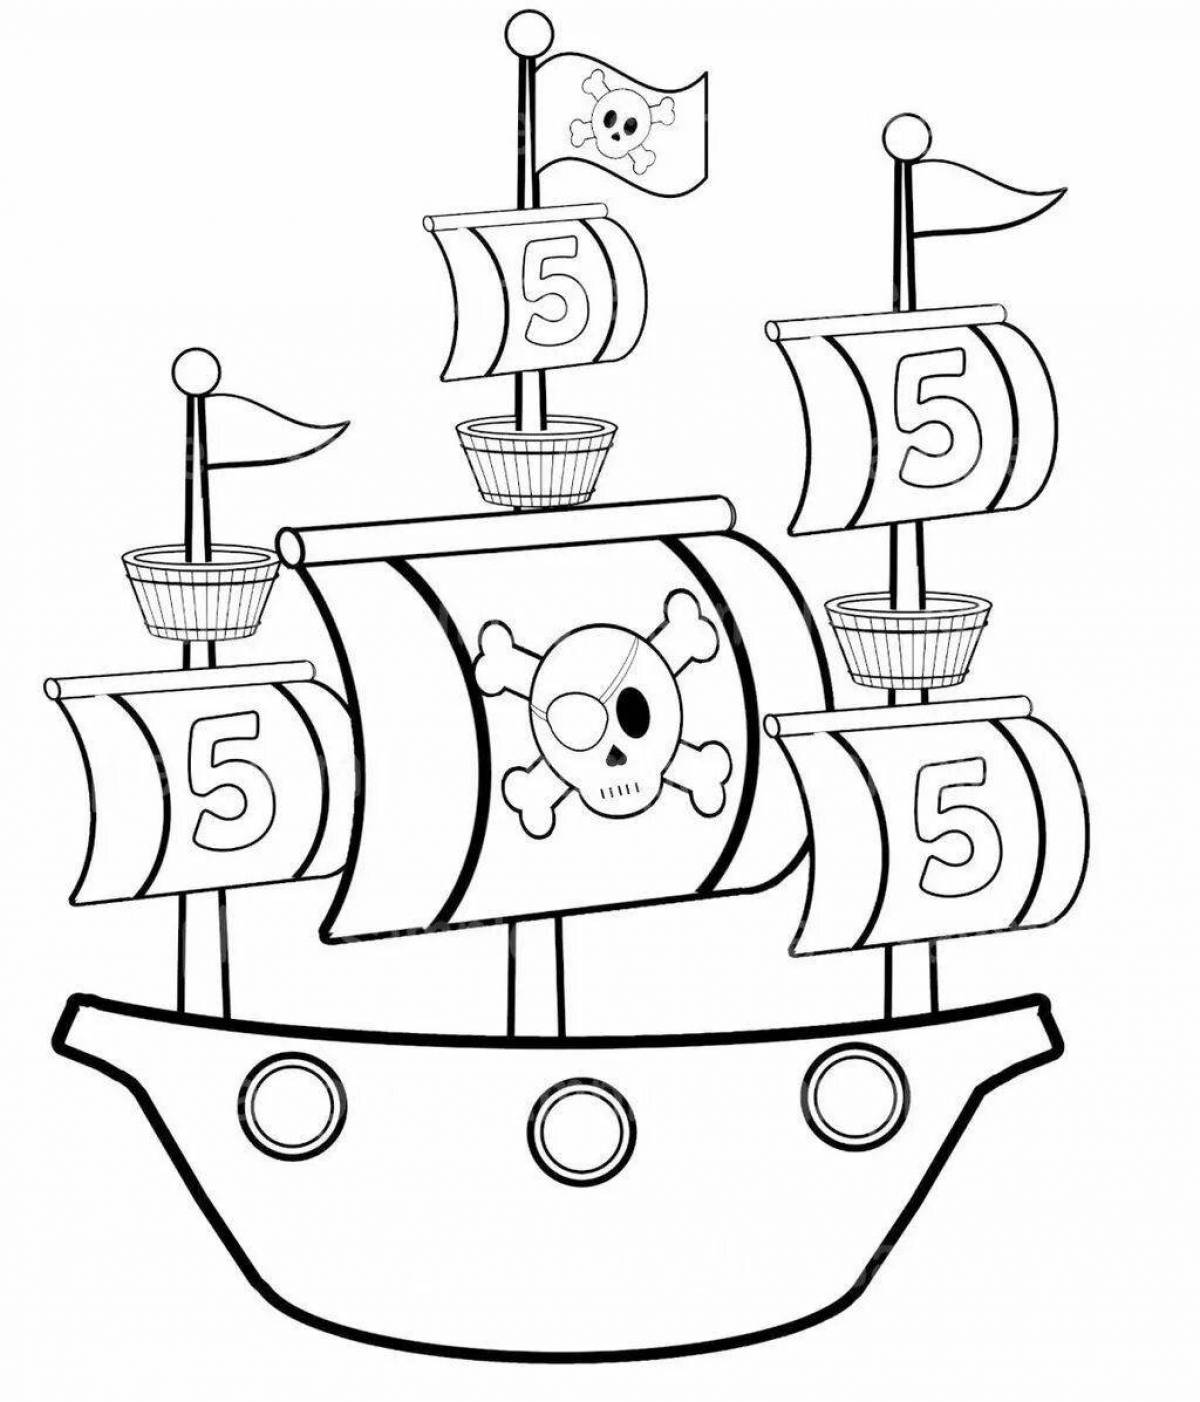 Adorable pirate ship coloring book for kids